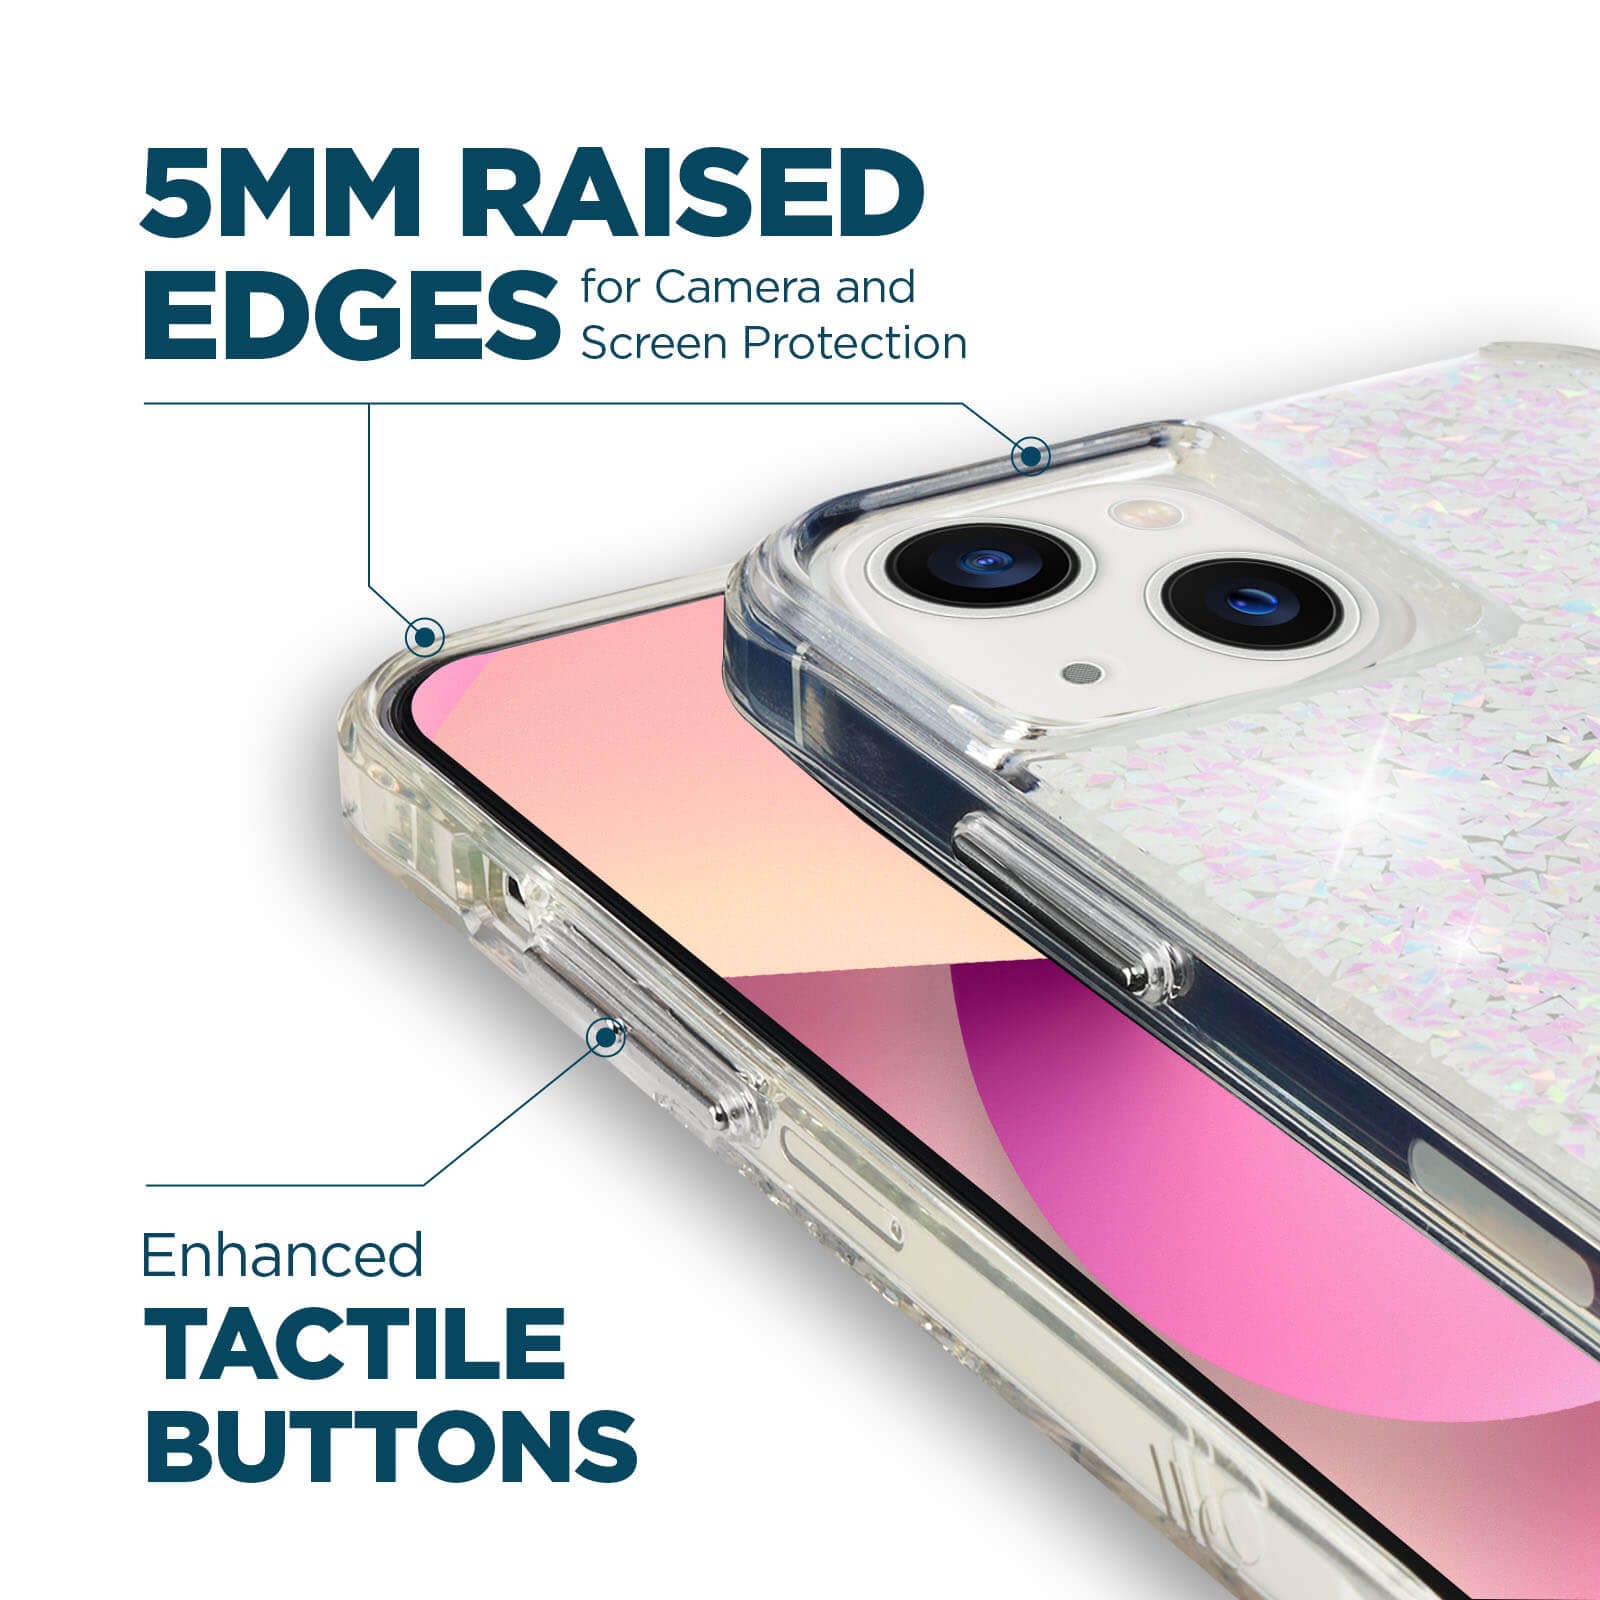 5mm raised edges for camera and screen protection. enhanced tactile buttons. color::Twinkle Diamond